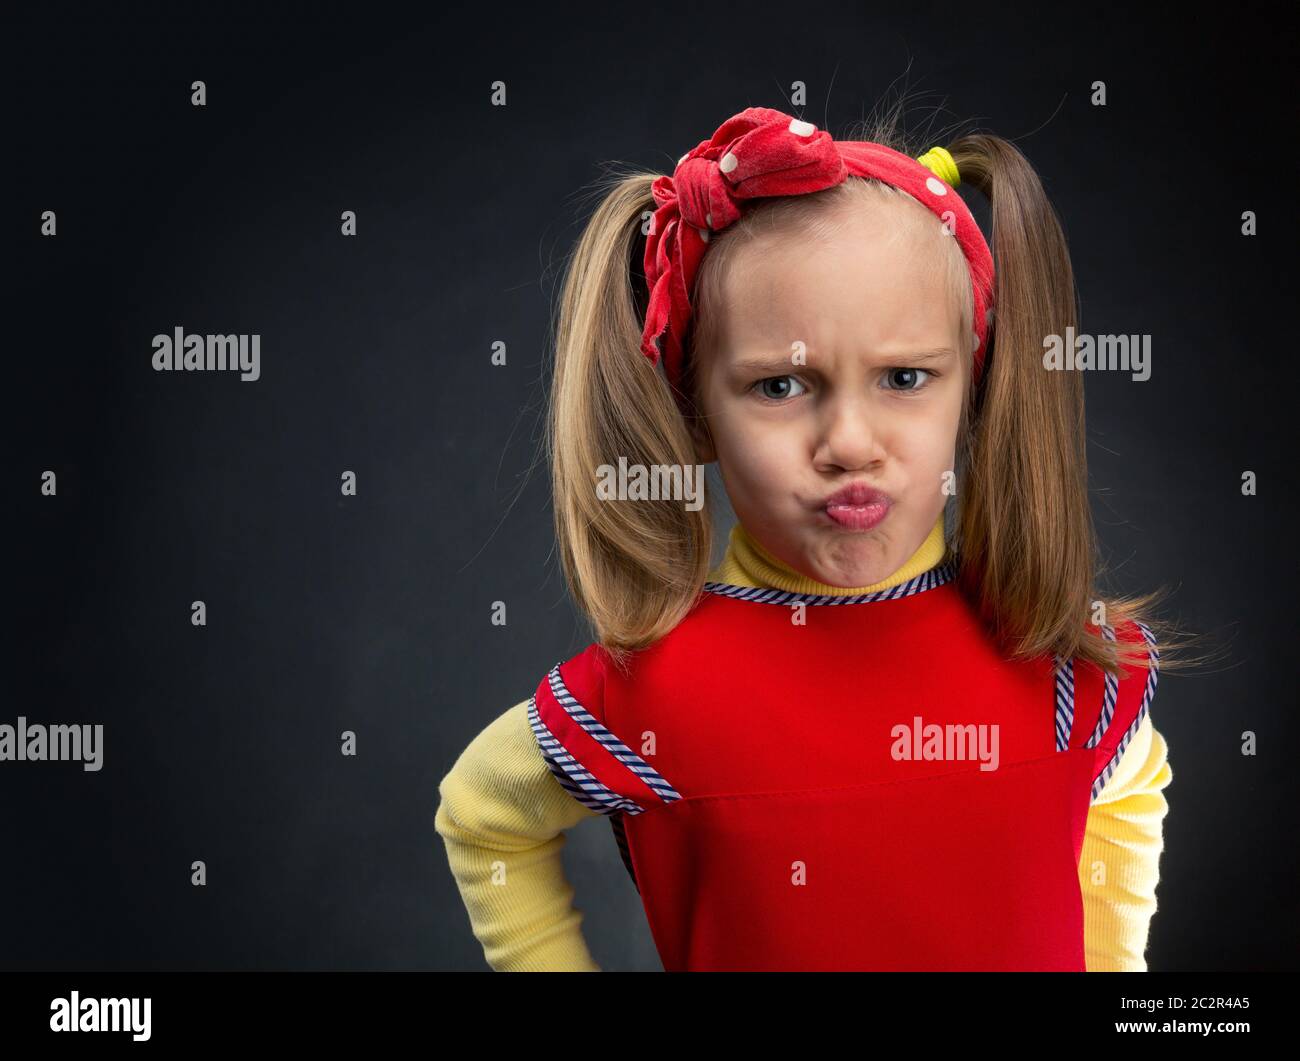 Funny Little Girl Making Faces High Resolution Stock Photography And Images Alamy